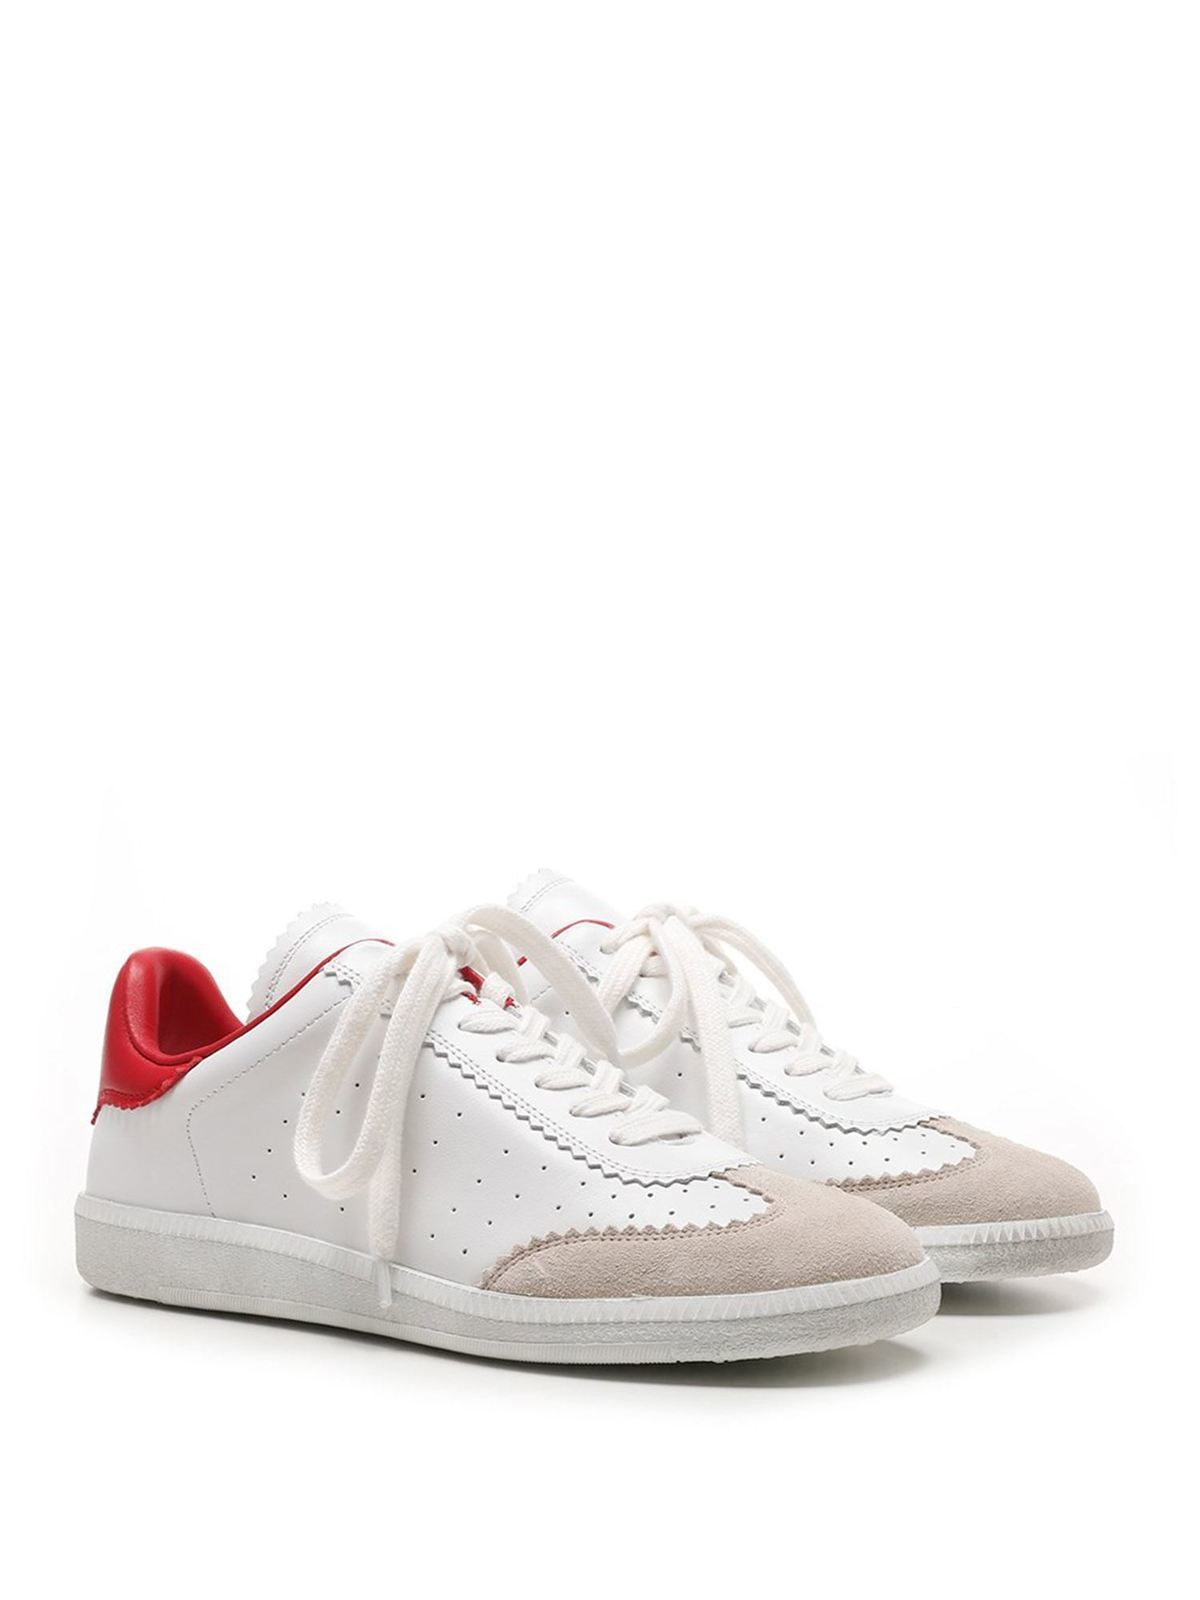 Trainers Isabel Bryce sneakers in red and white - BK002921P041SRED